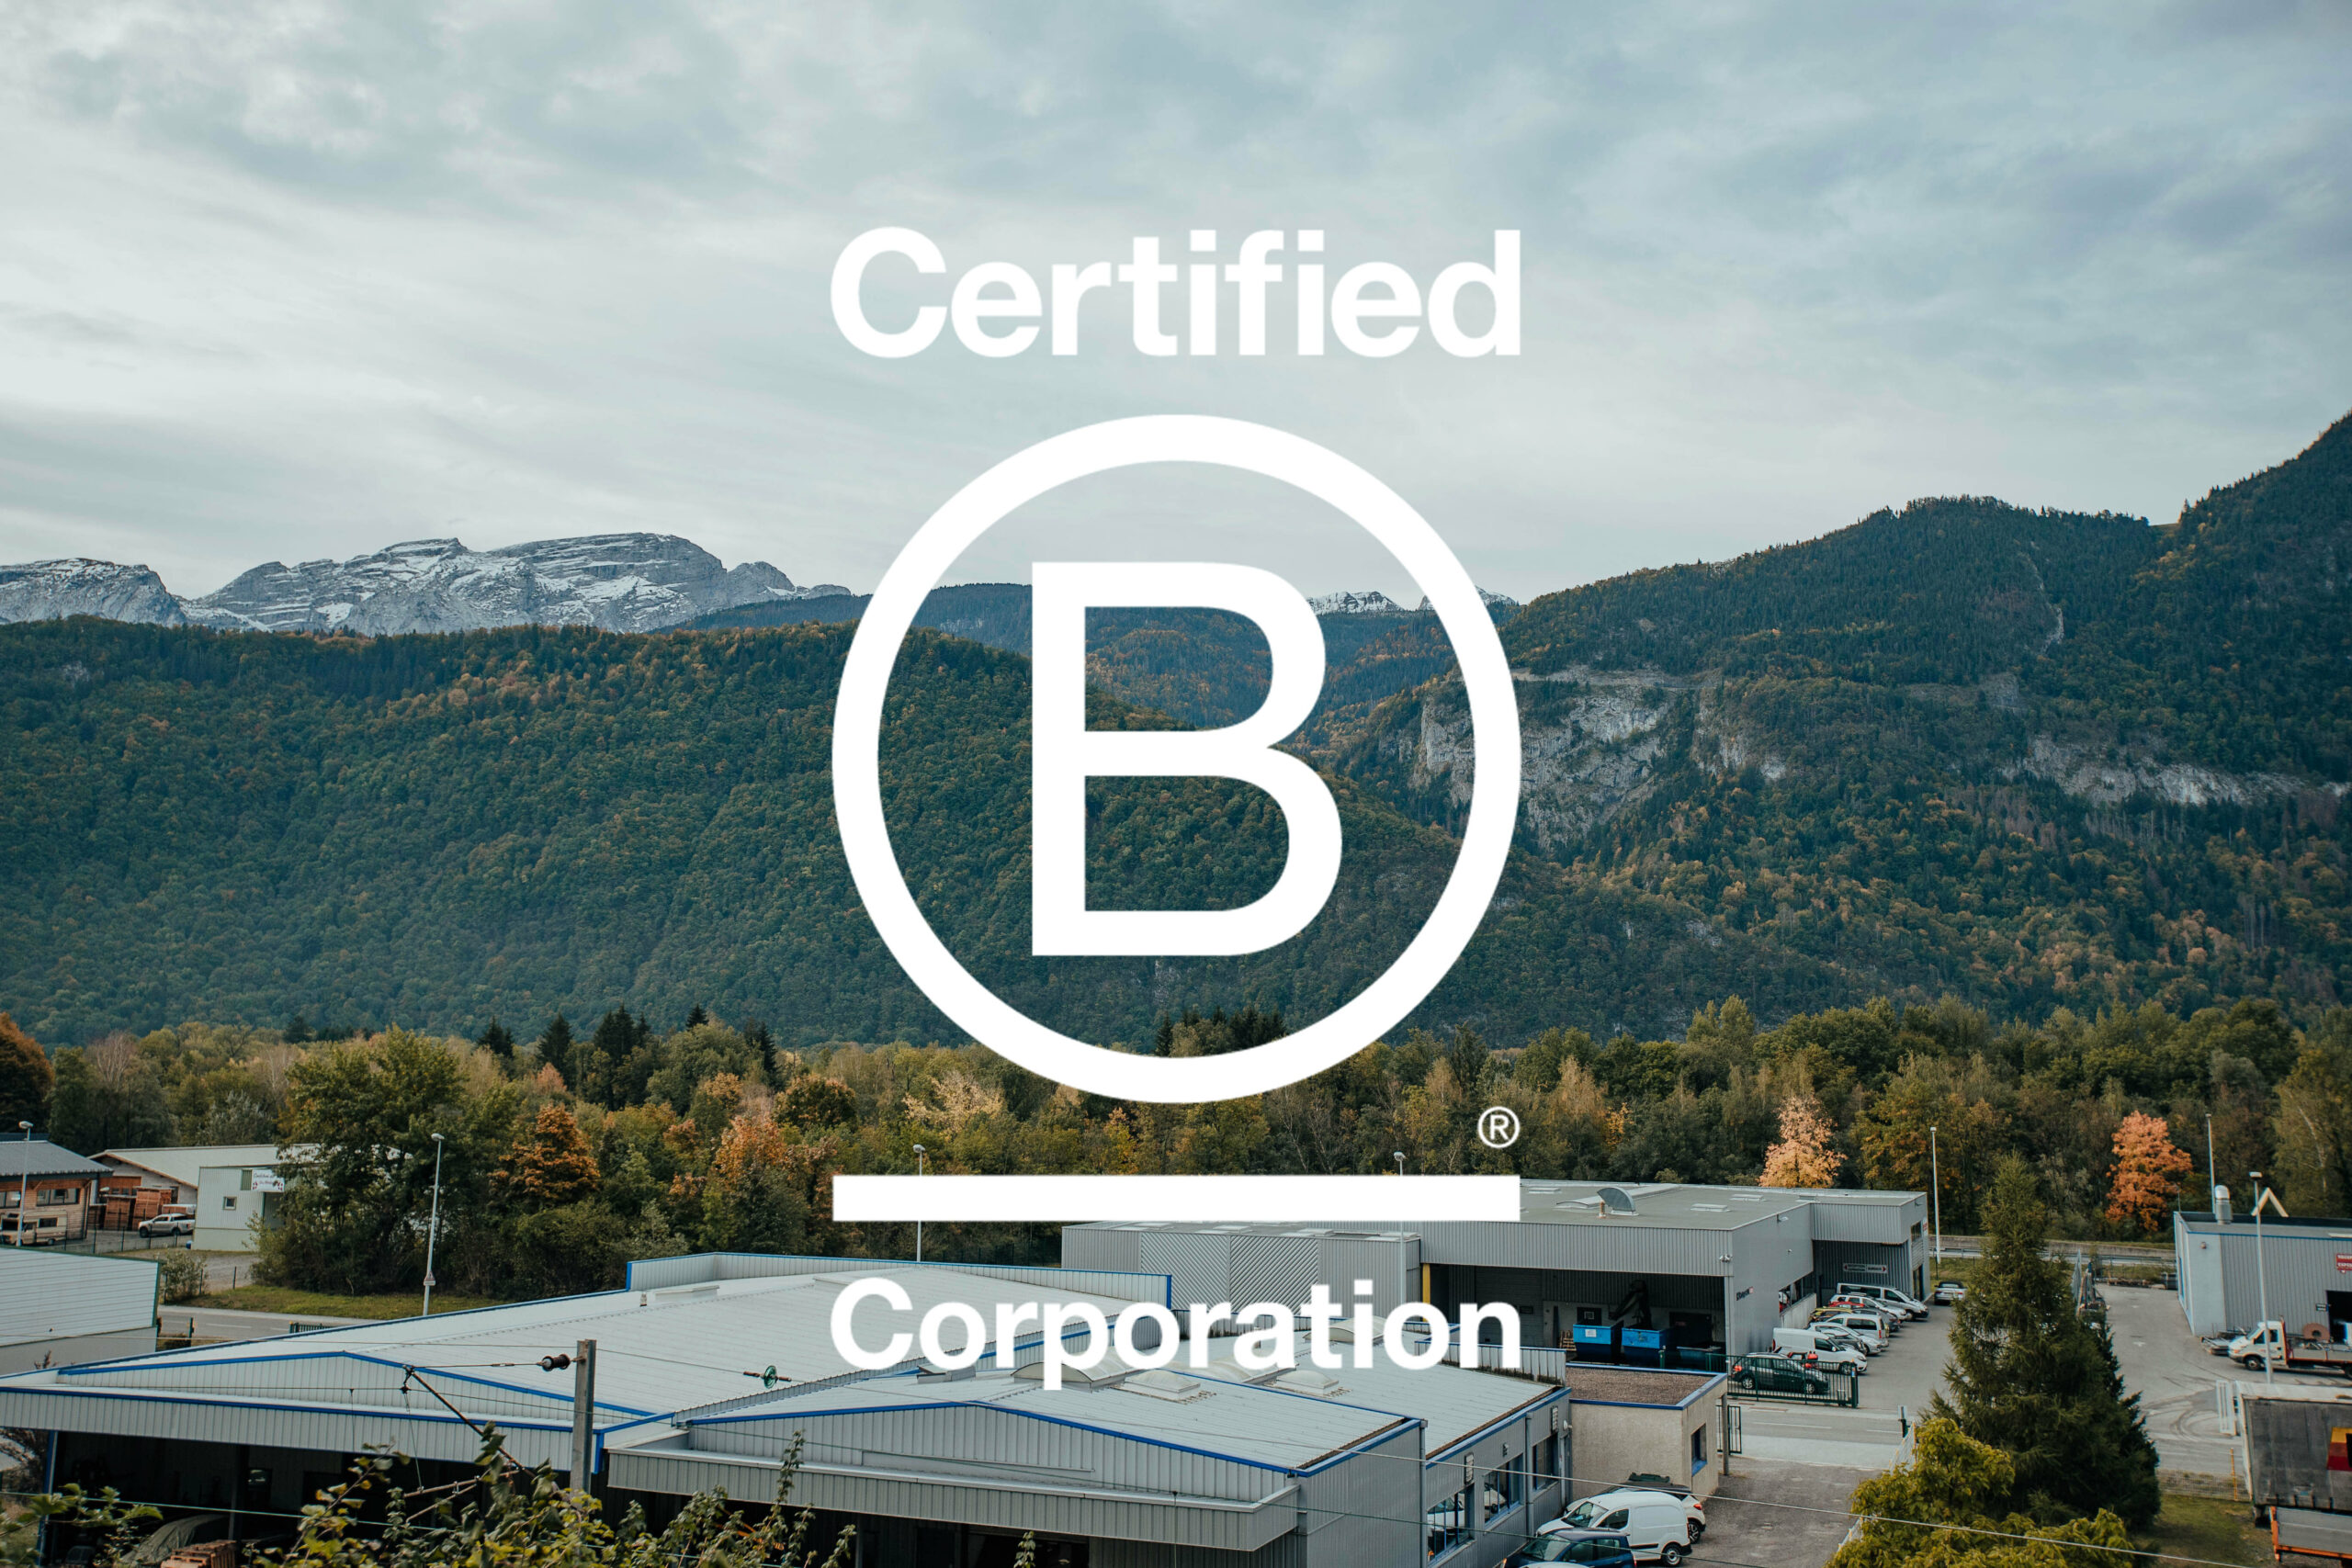 TIPTOE obtains B Corp certification and strengthens its CSR commitments